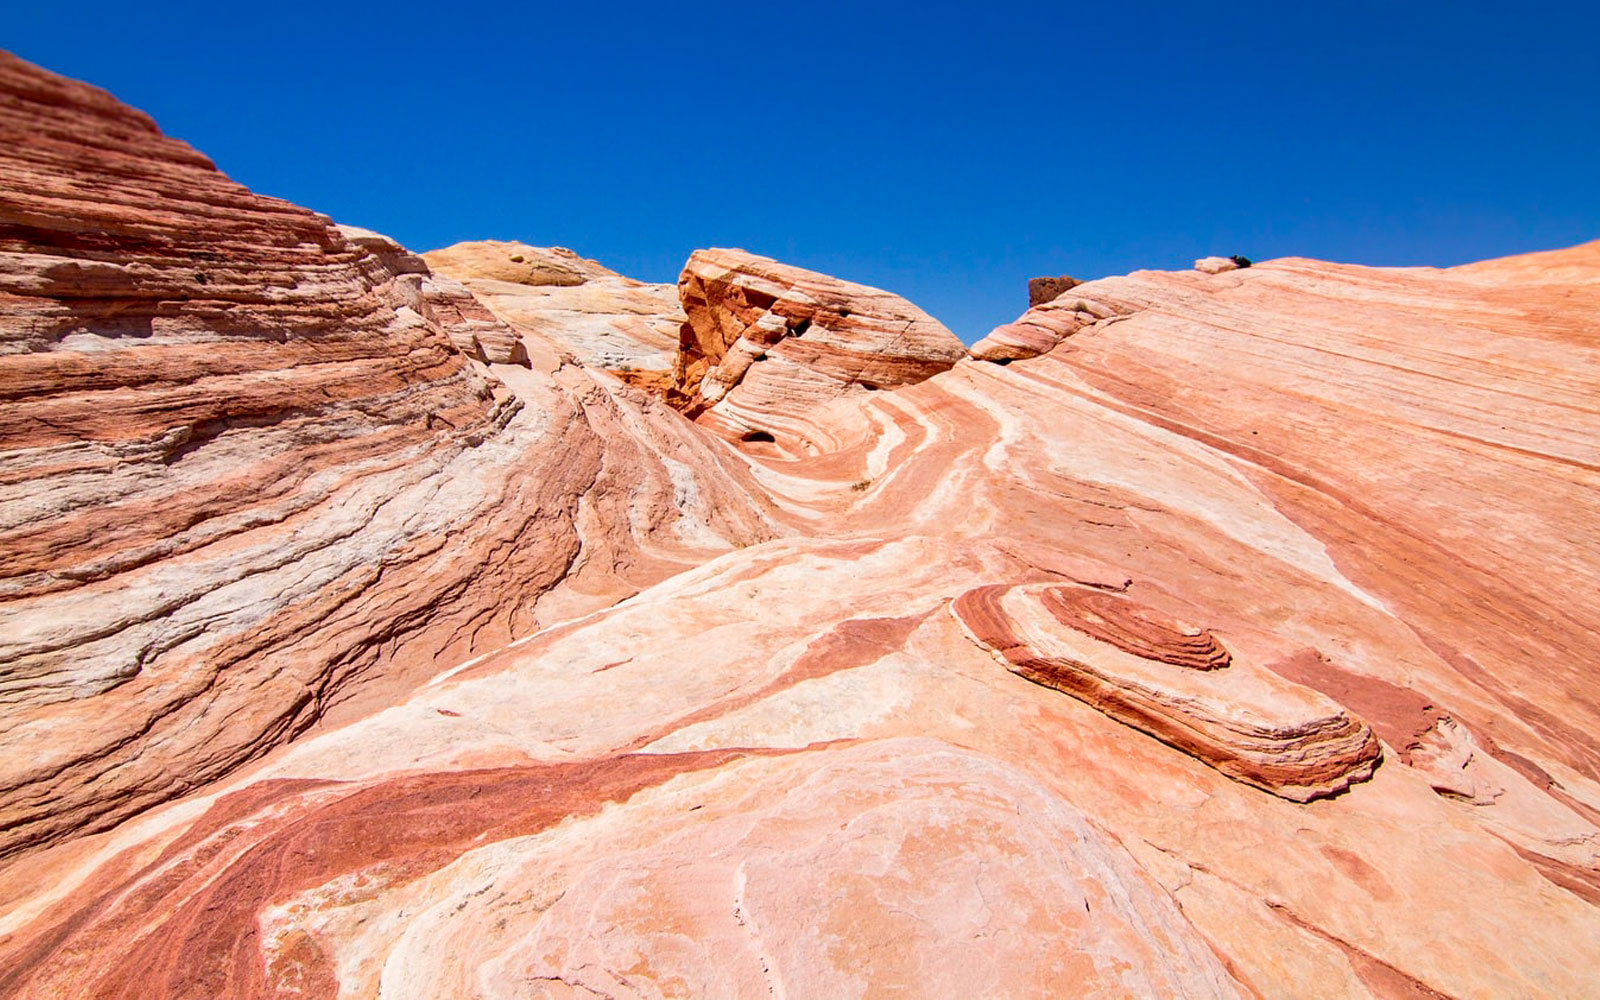 Valley of Fire State Park is one of a number of gorgeous outdoor areas that one can reach from Las Vegas